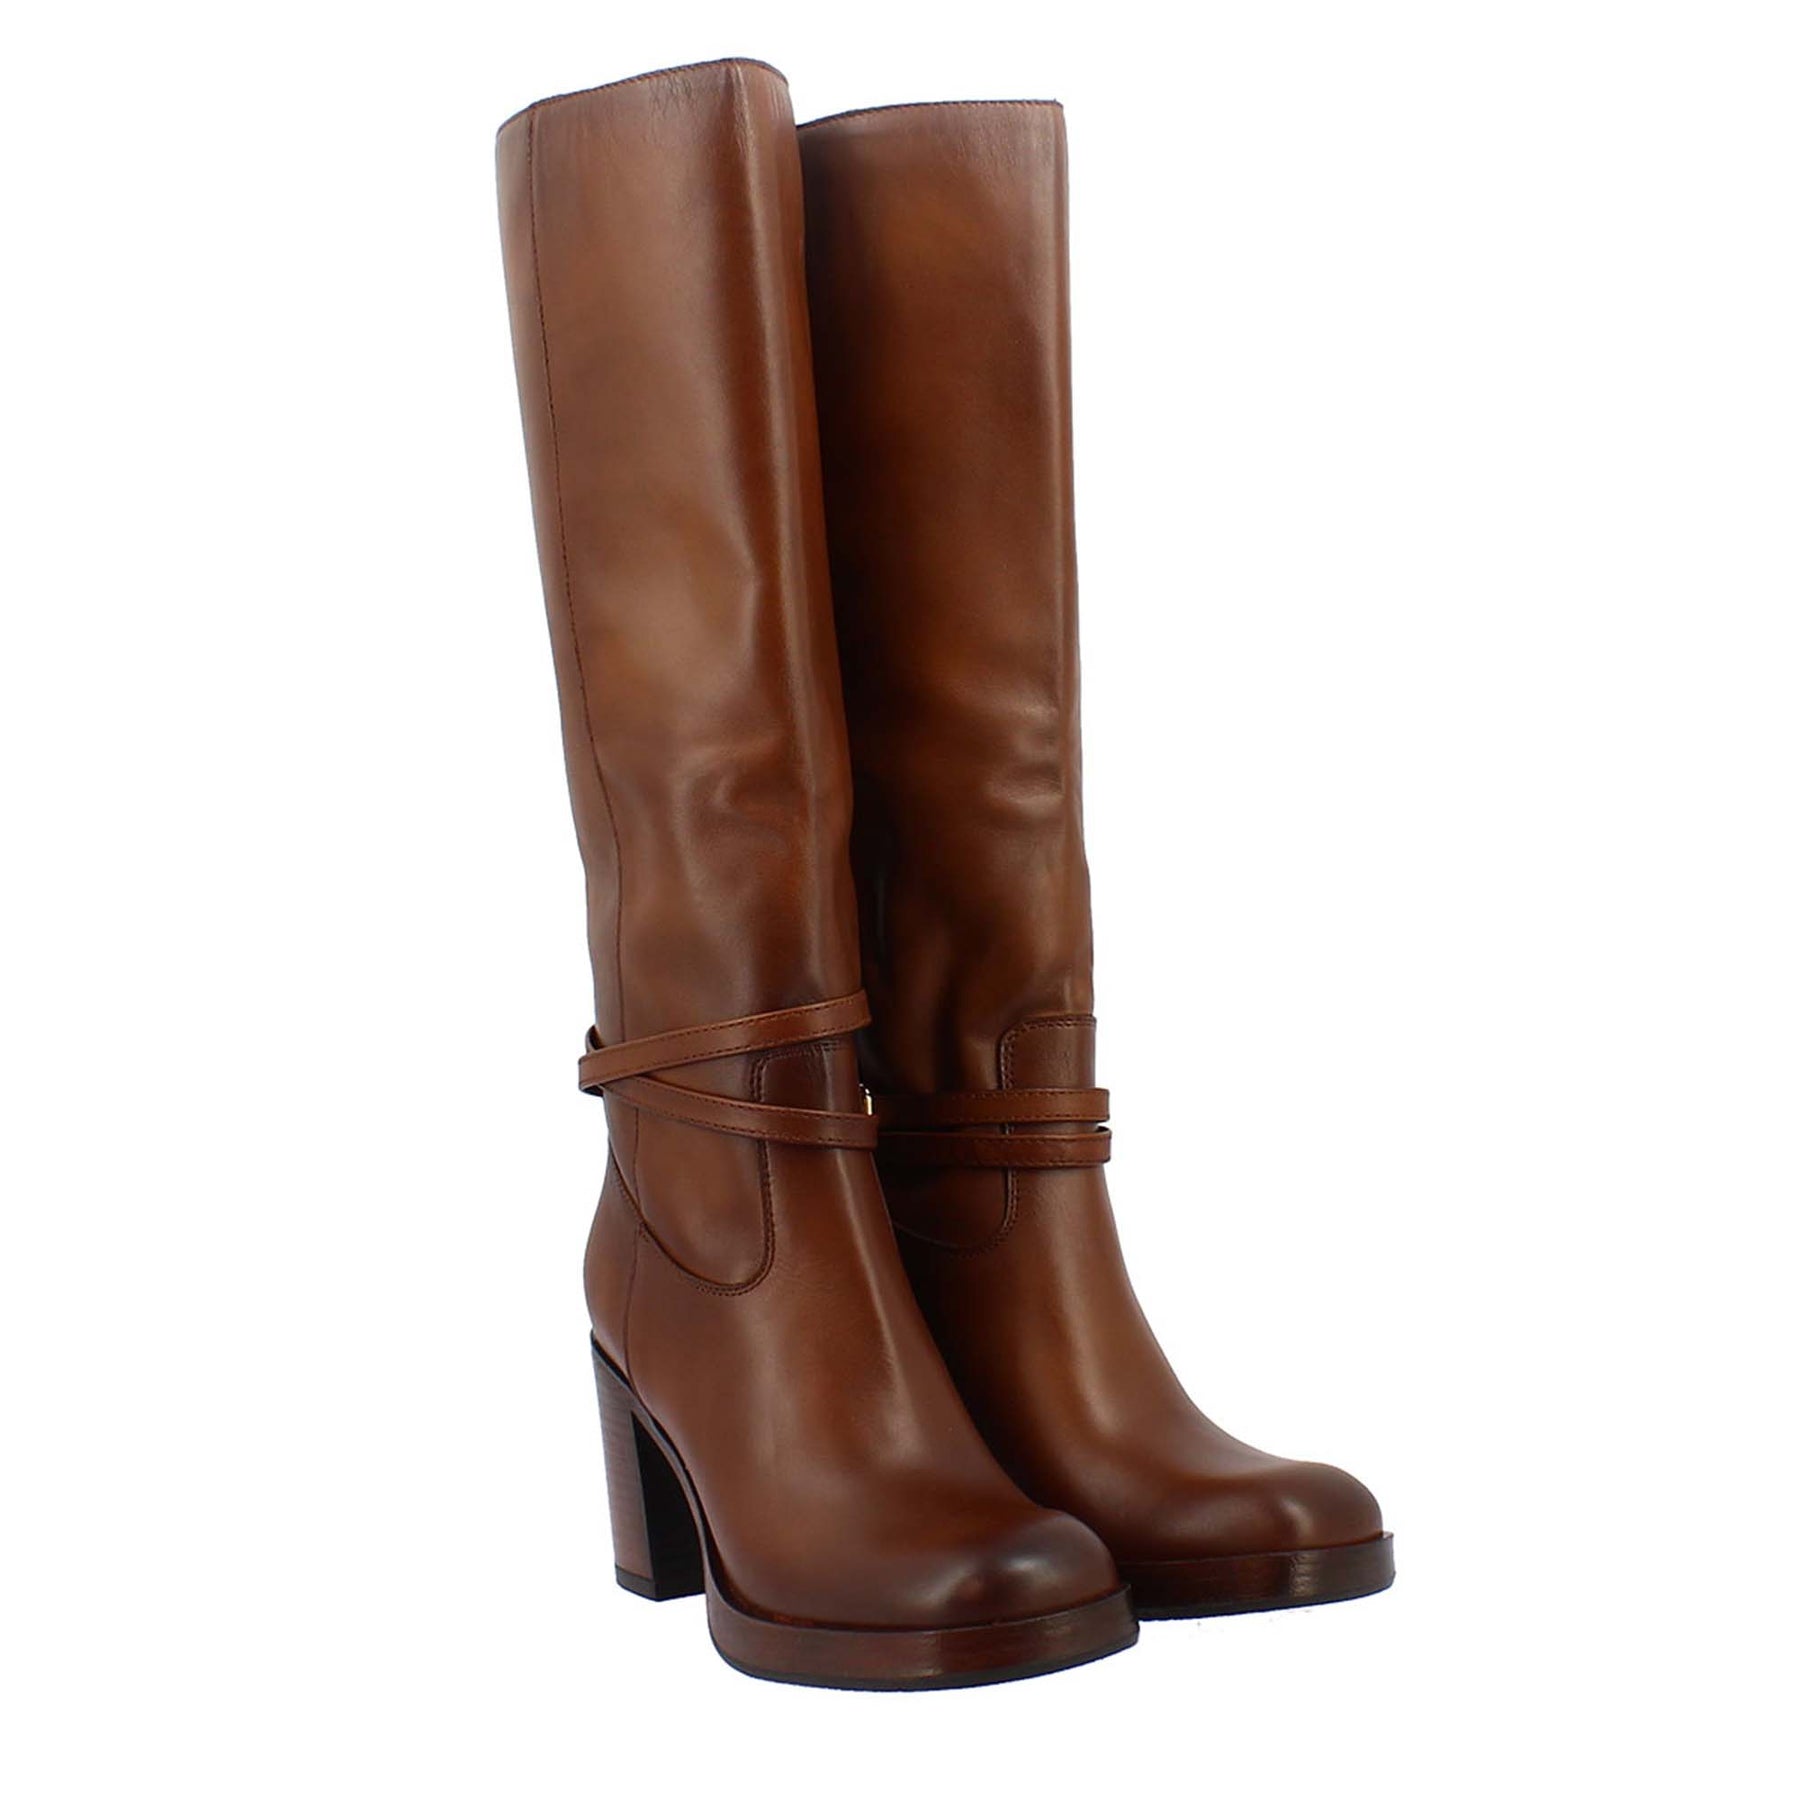 Leather Boots - brown 8-85500-41-305: Buy Tamaris Boots online!